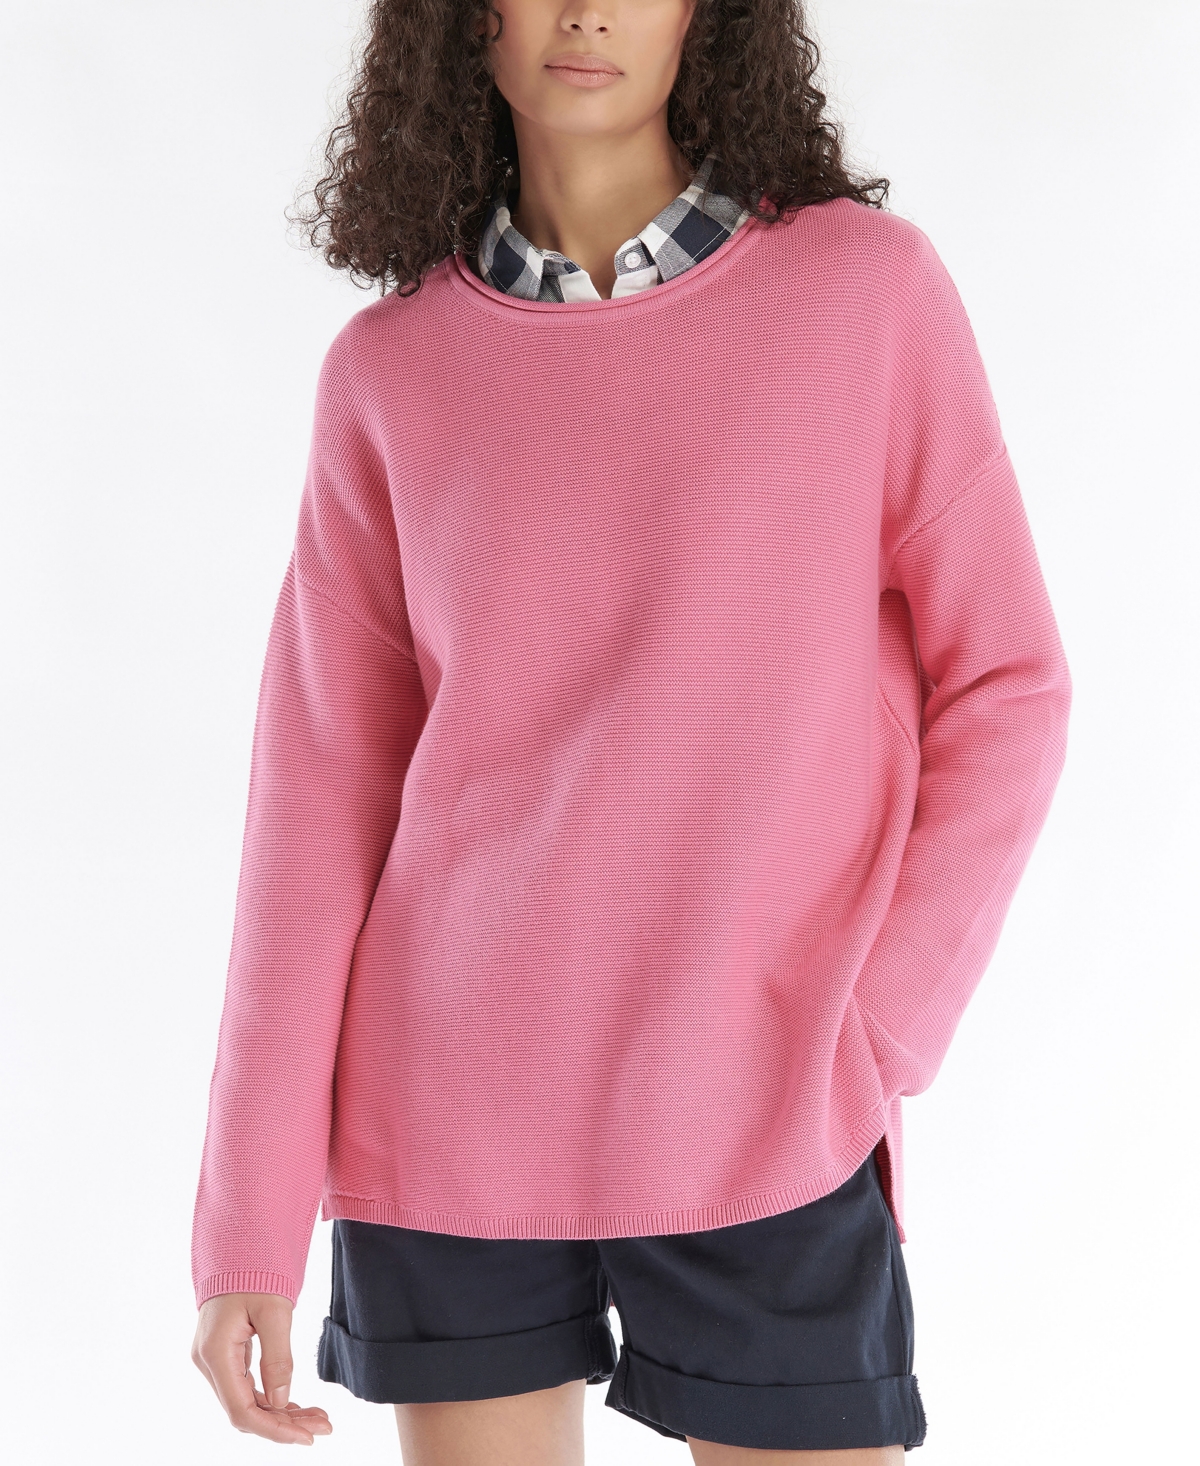 Barbour Women's Mariner Knit Sweater